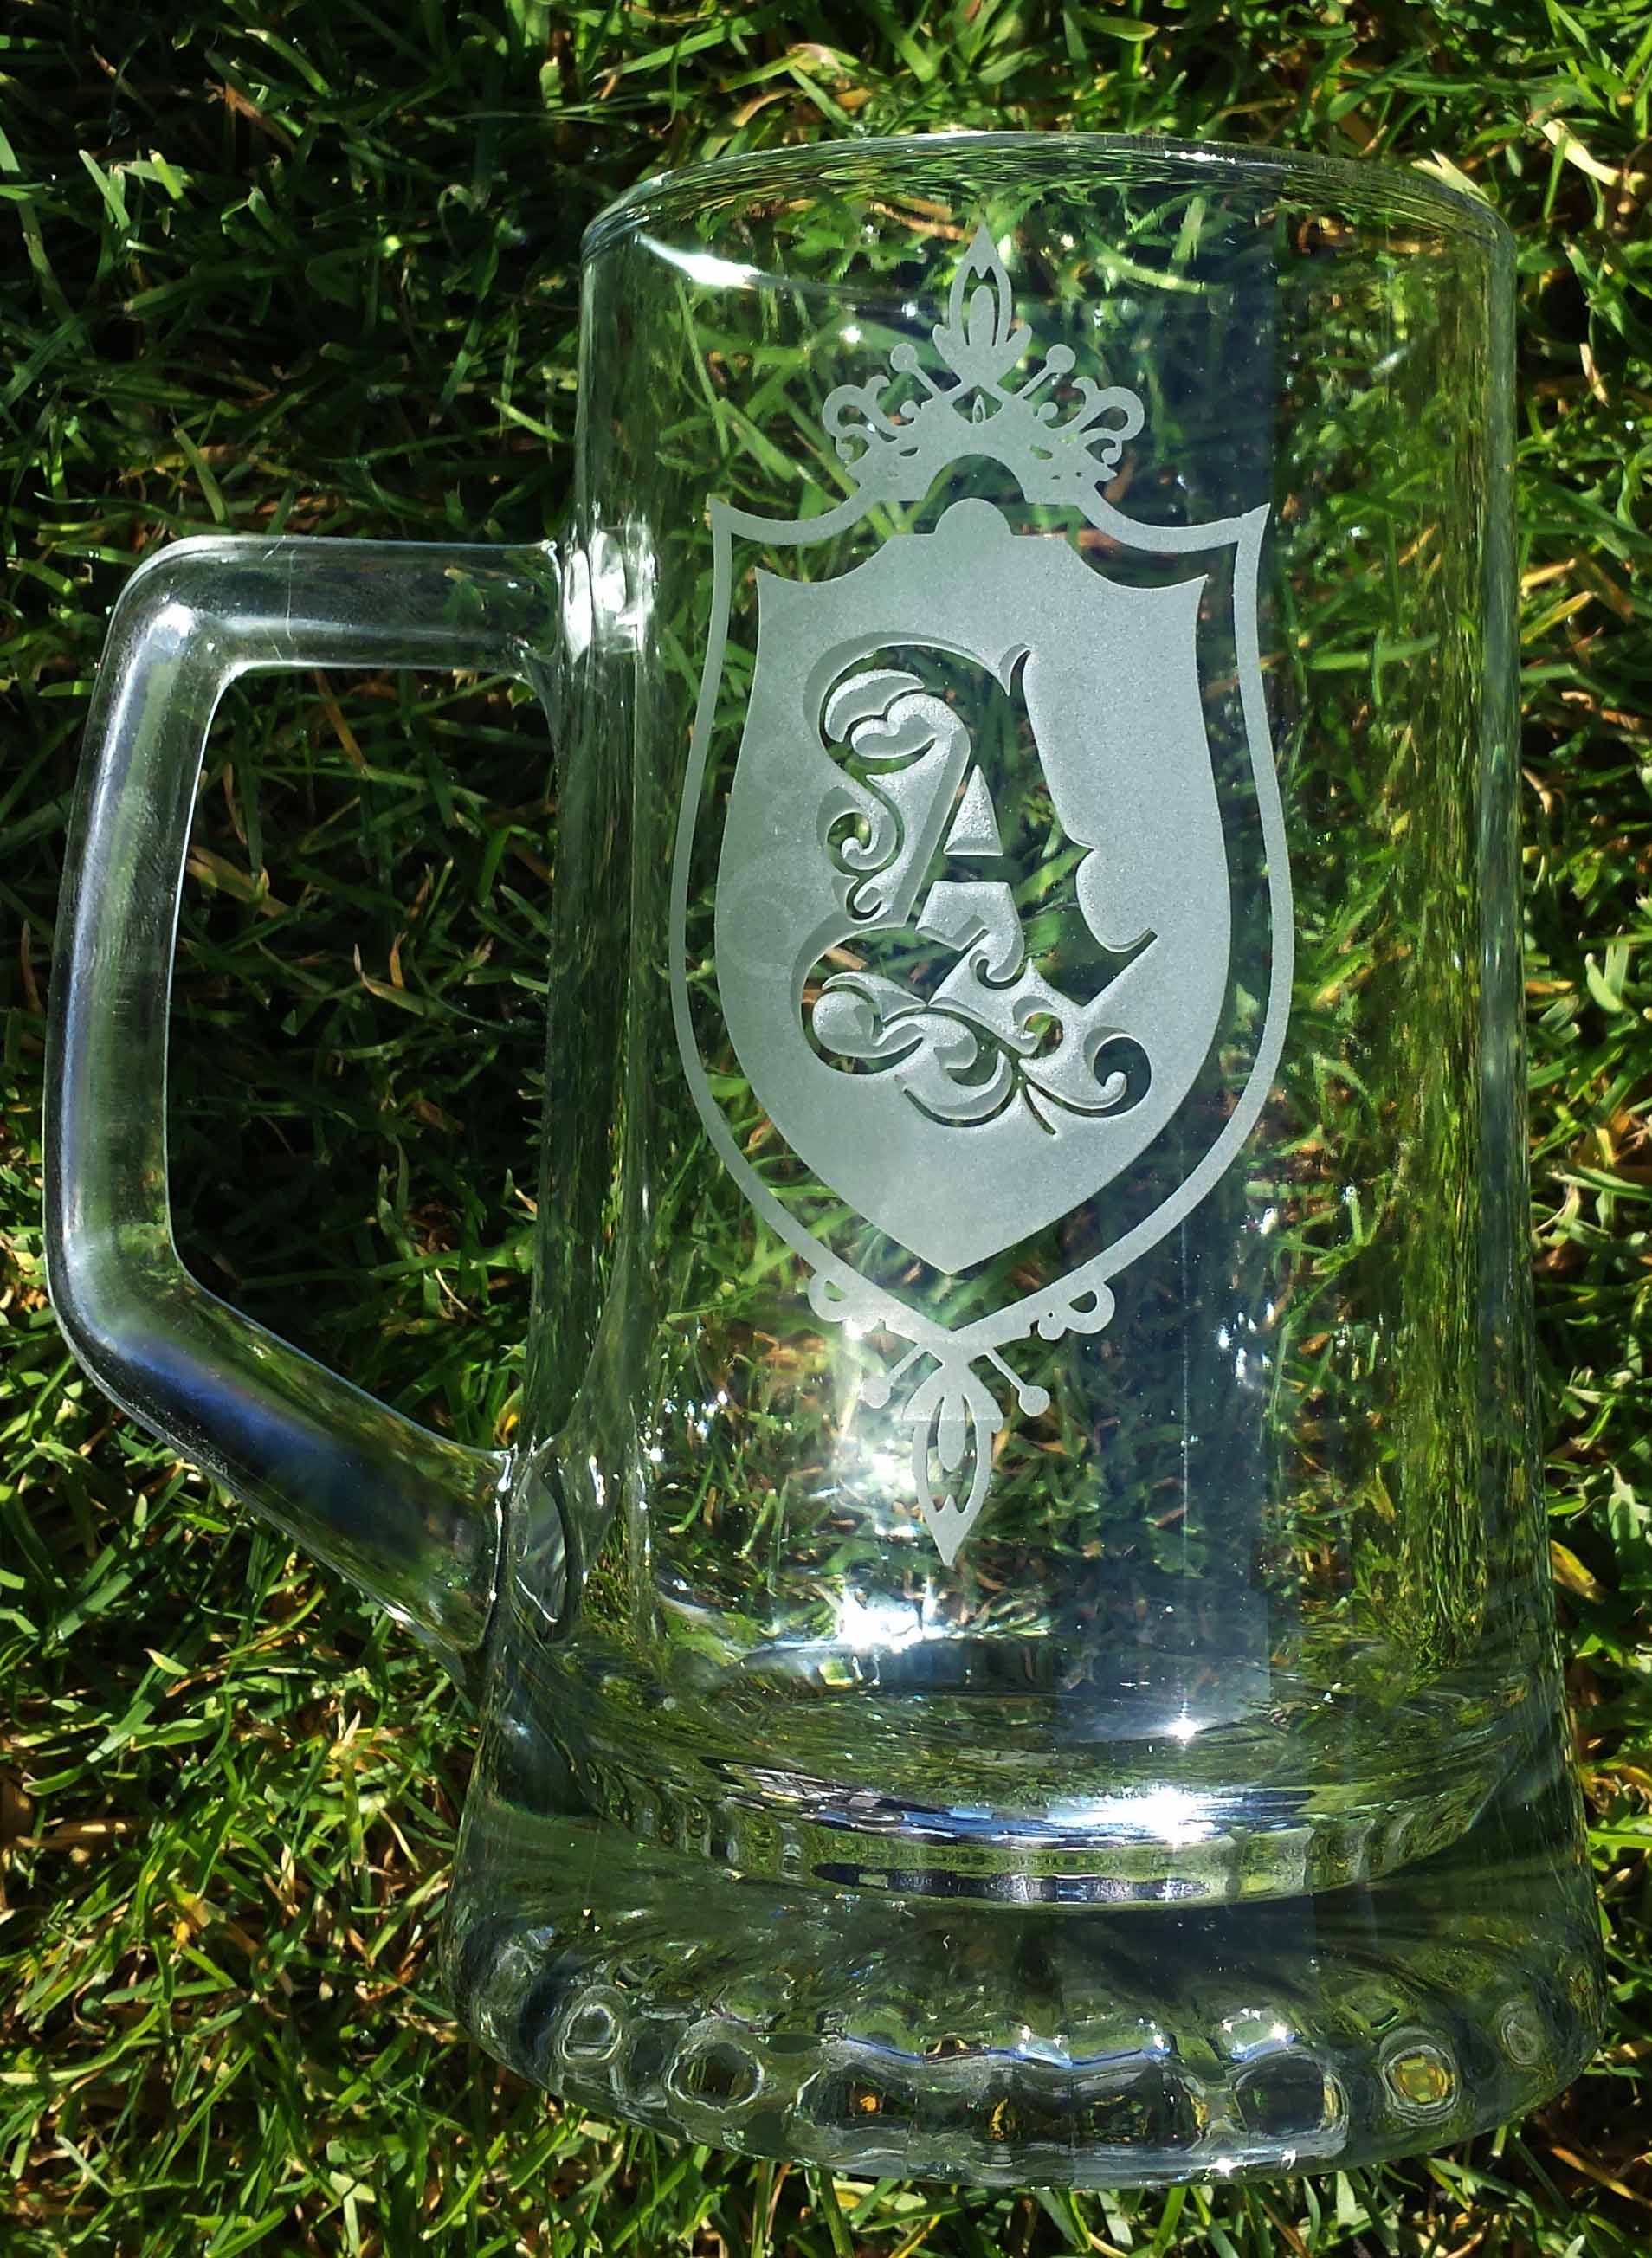 This is a pint glass engraved very deeply around a monogrammed A giving the A the look of being high above the surface of the Glass.